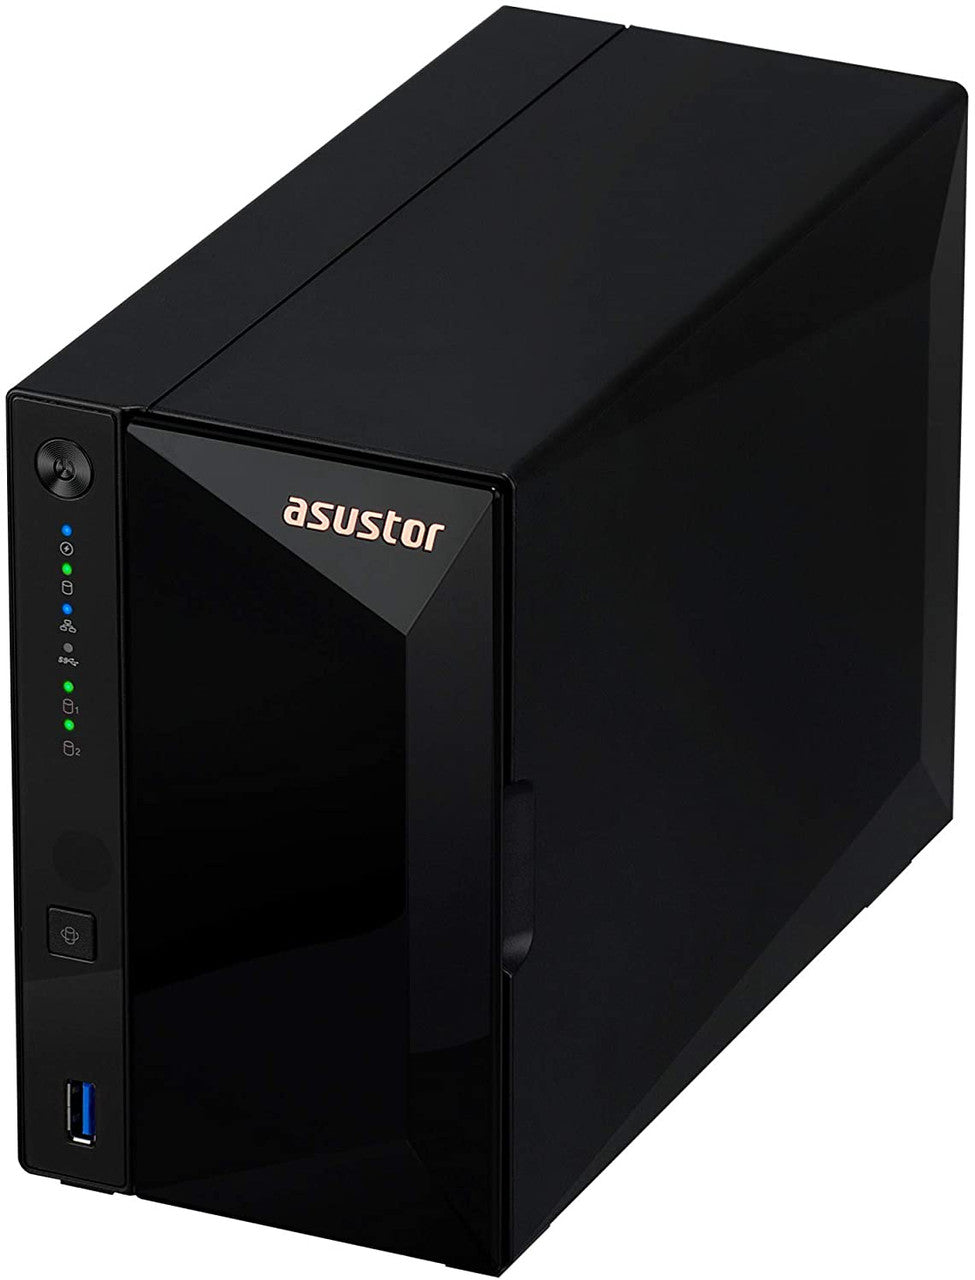 Asustor AS3302T 2-Bay Drivestor 2 PRO NAS with 2GB RAM and 8TB (2x4TB) Western Digital RED Plus Drives Fully Assembled and Tested